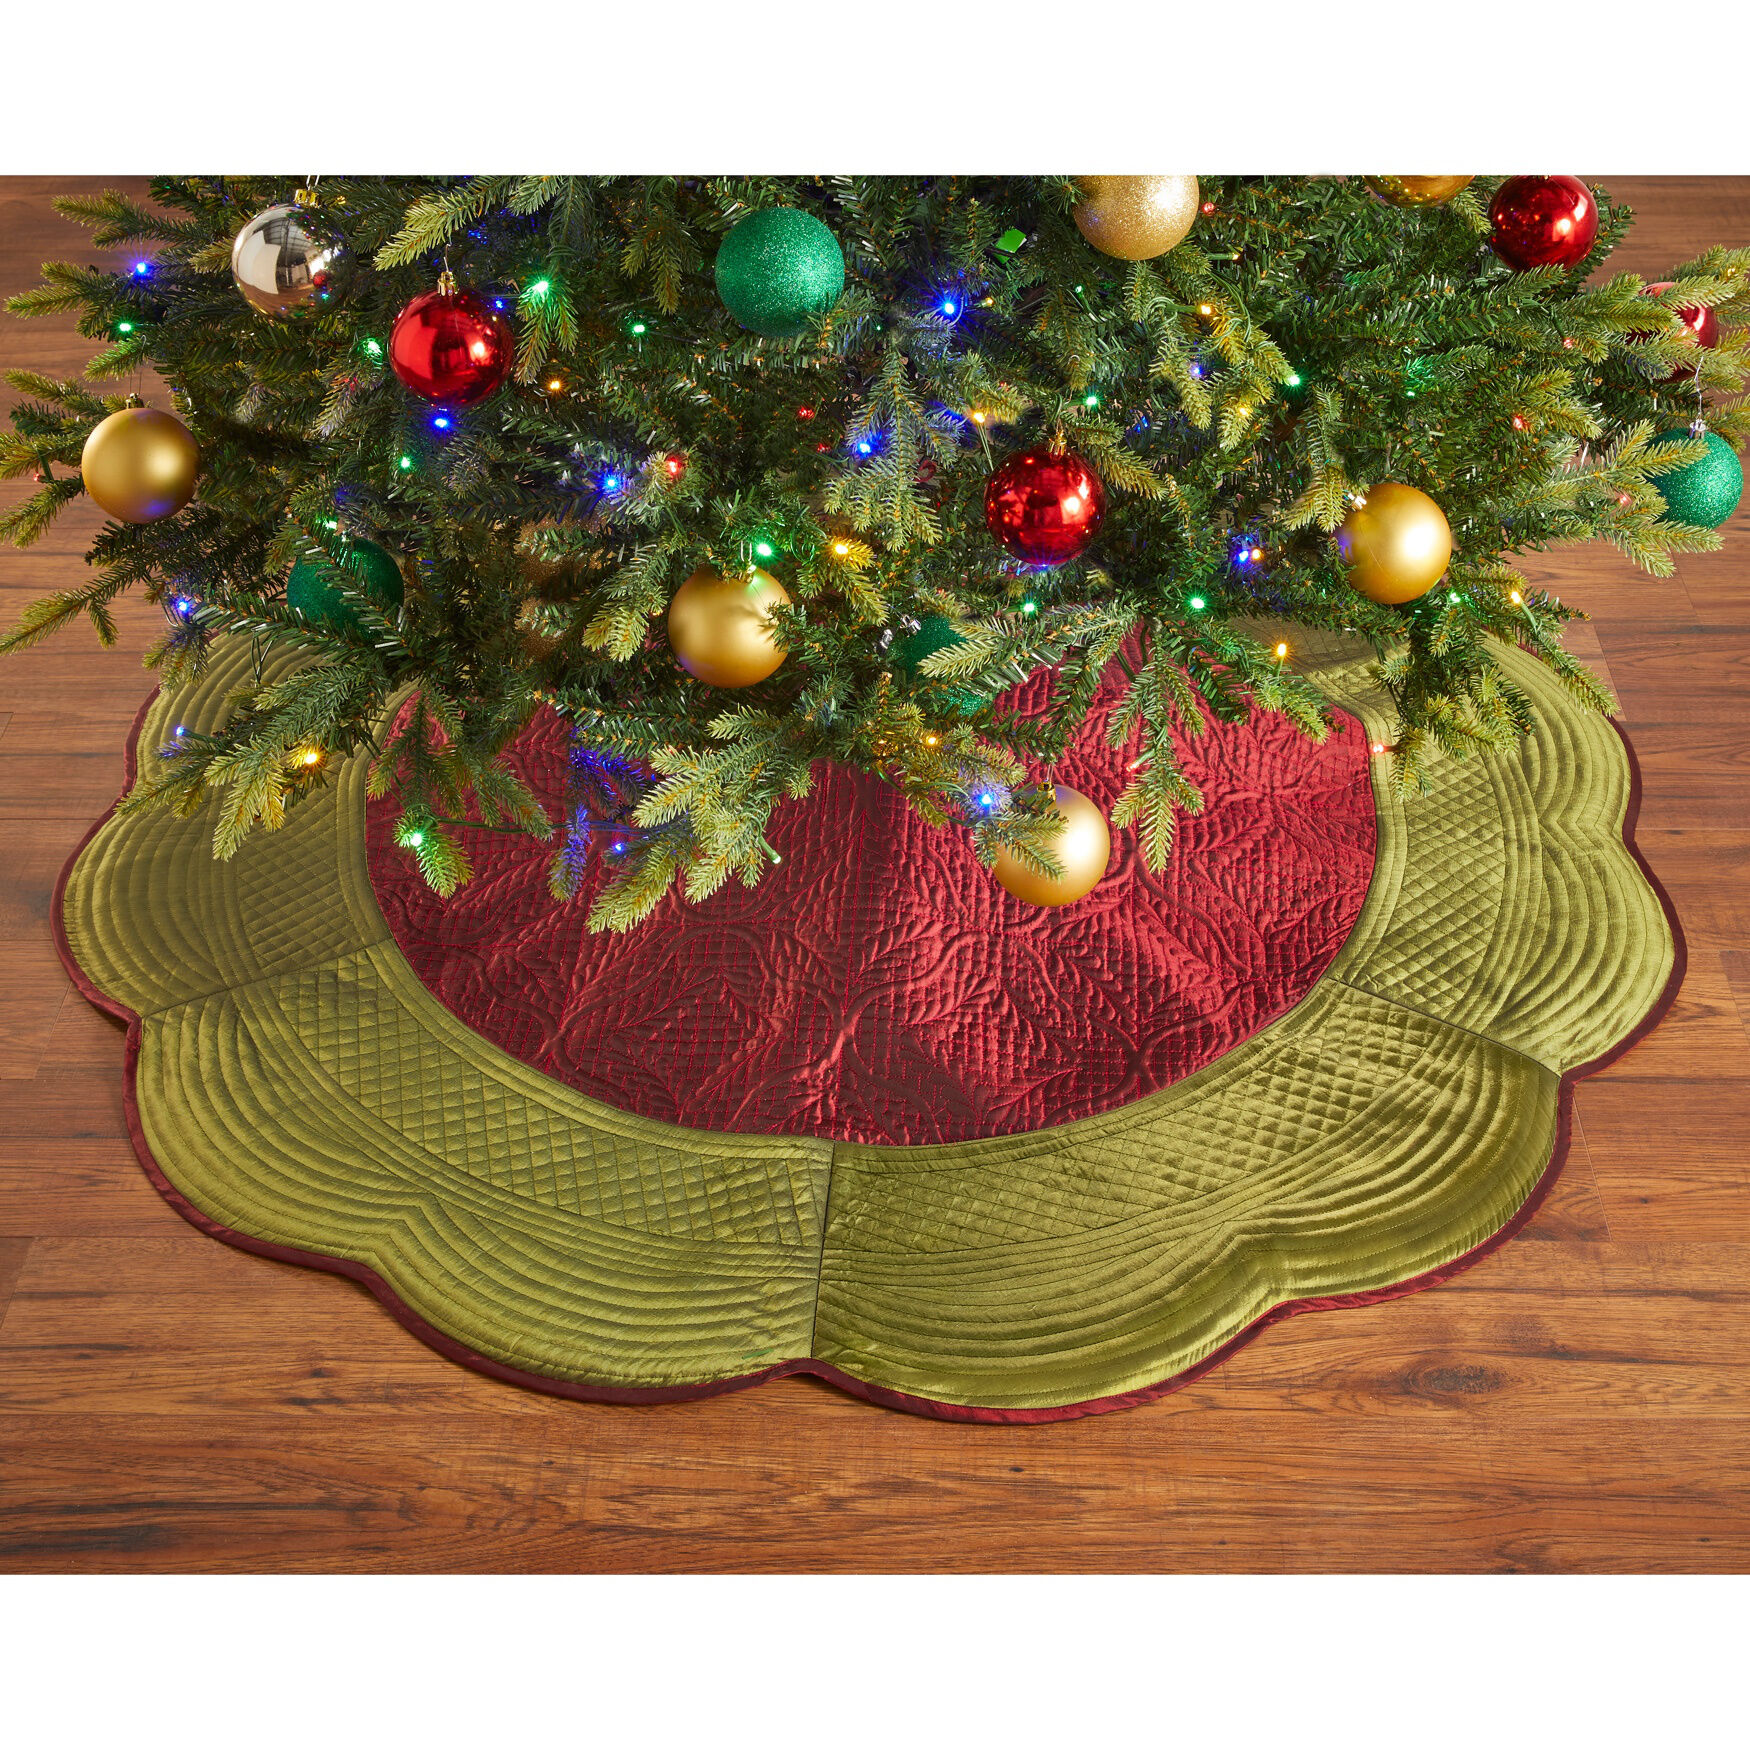 Personalized Tree Skirt, Christmas Holiday Decor, Emerald Green Rhinestone  Crystal Pines, Embroidered Custom Names